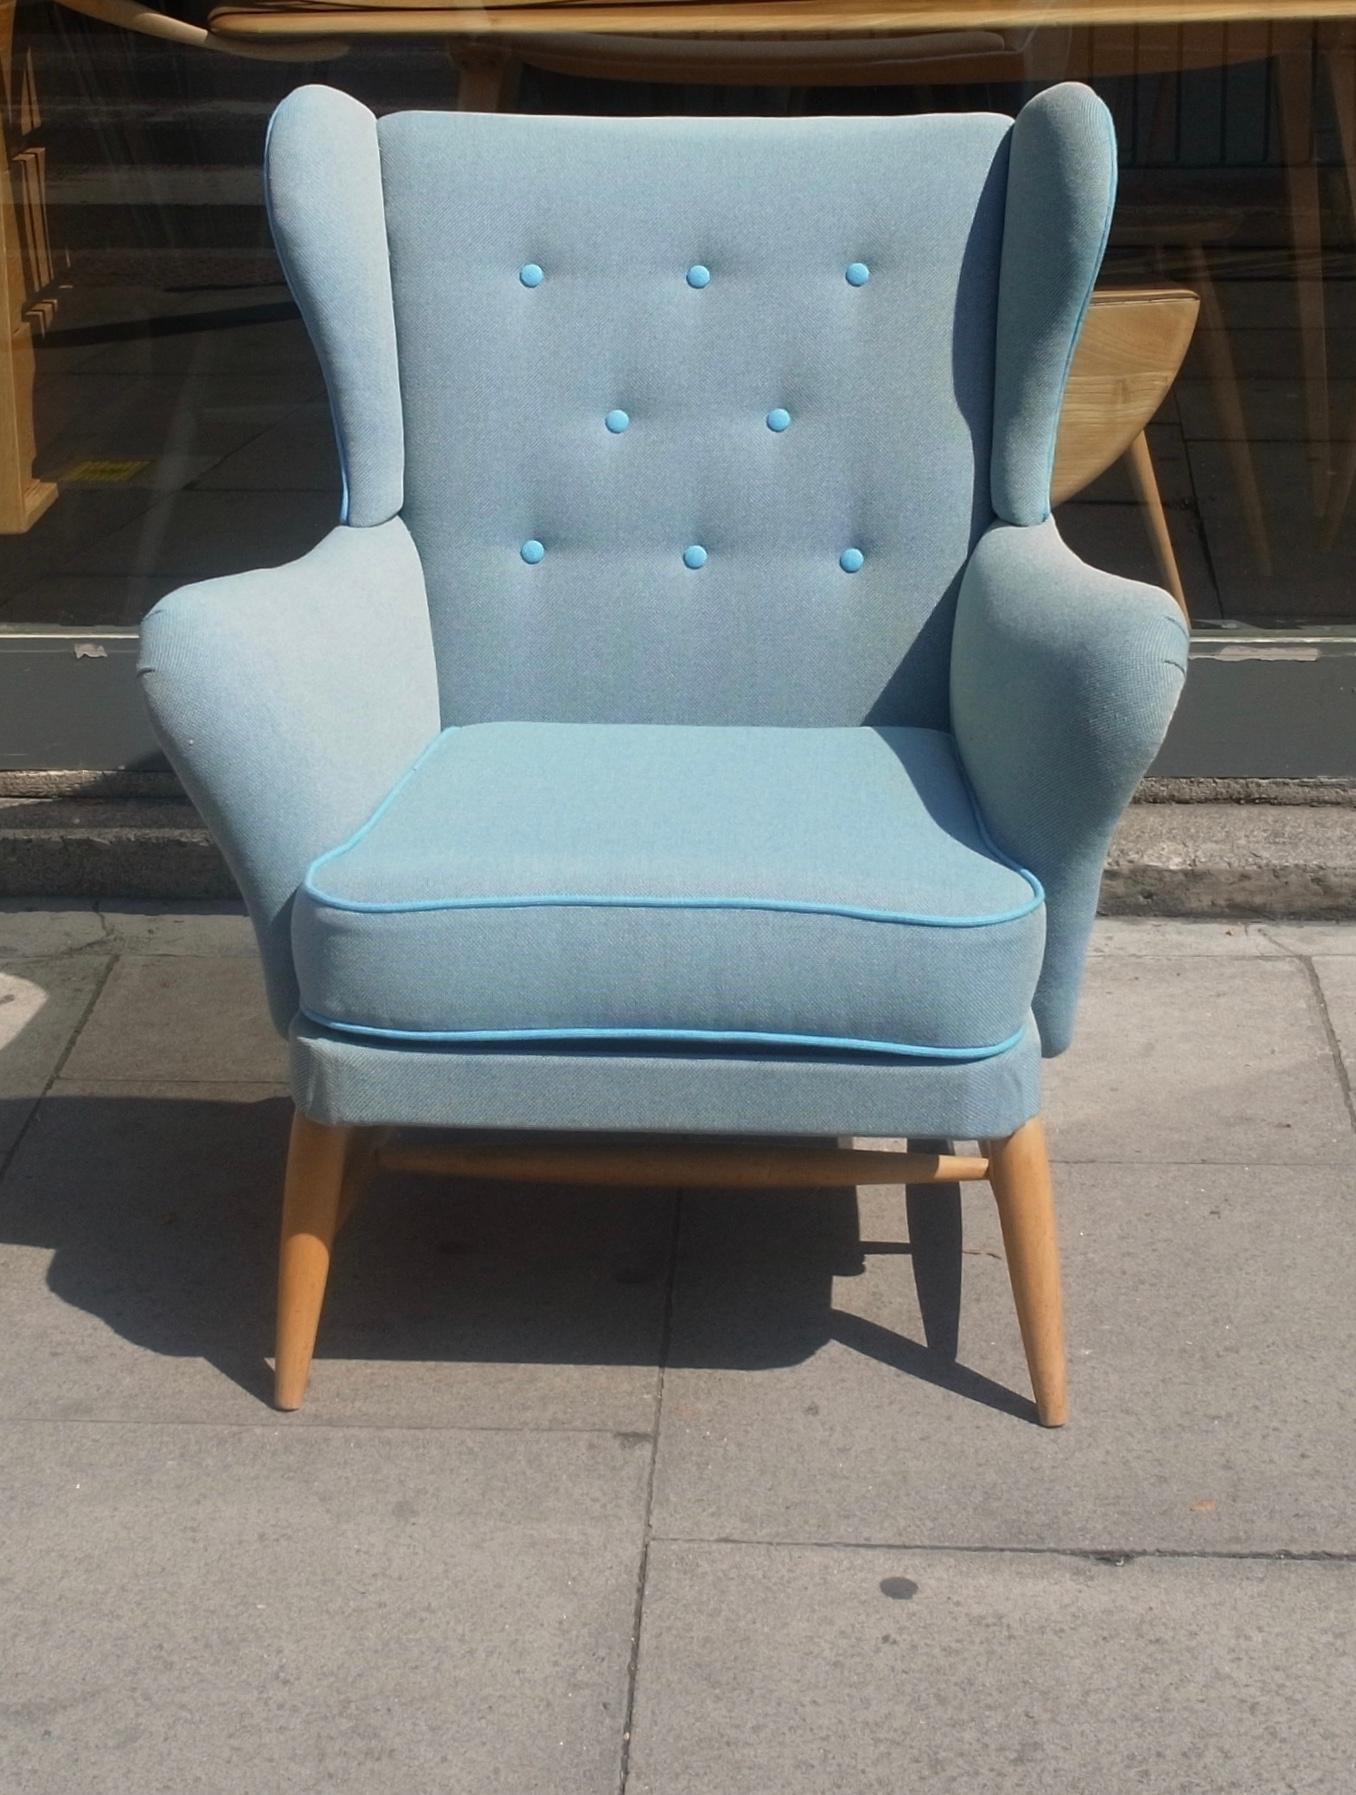 English Rare Vintage 1950s Ercol Wingback Armchair Upholstered in Blue Wool Textile